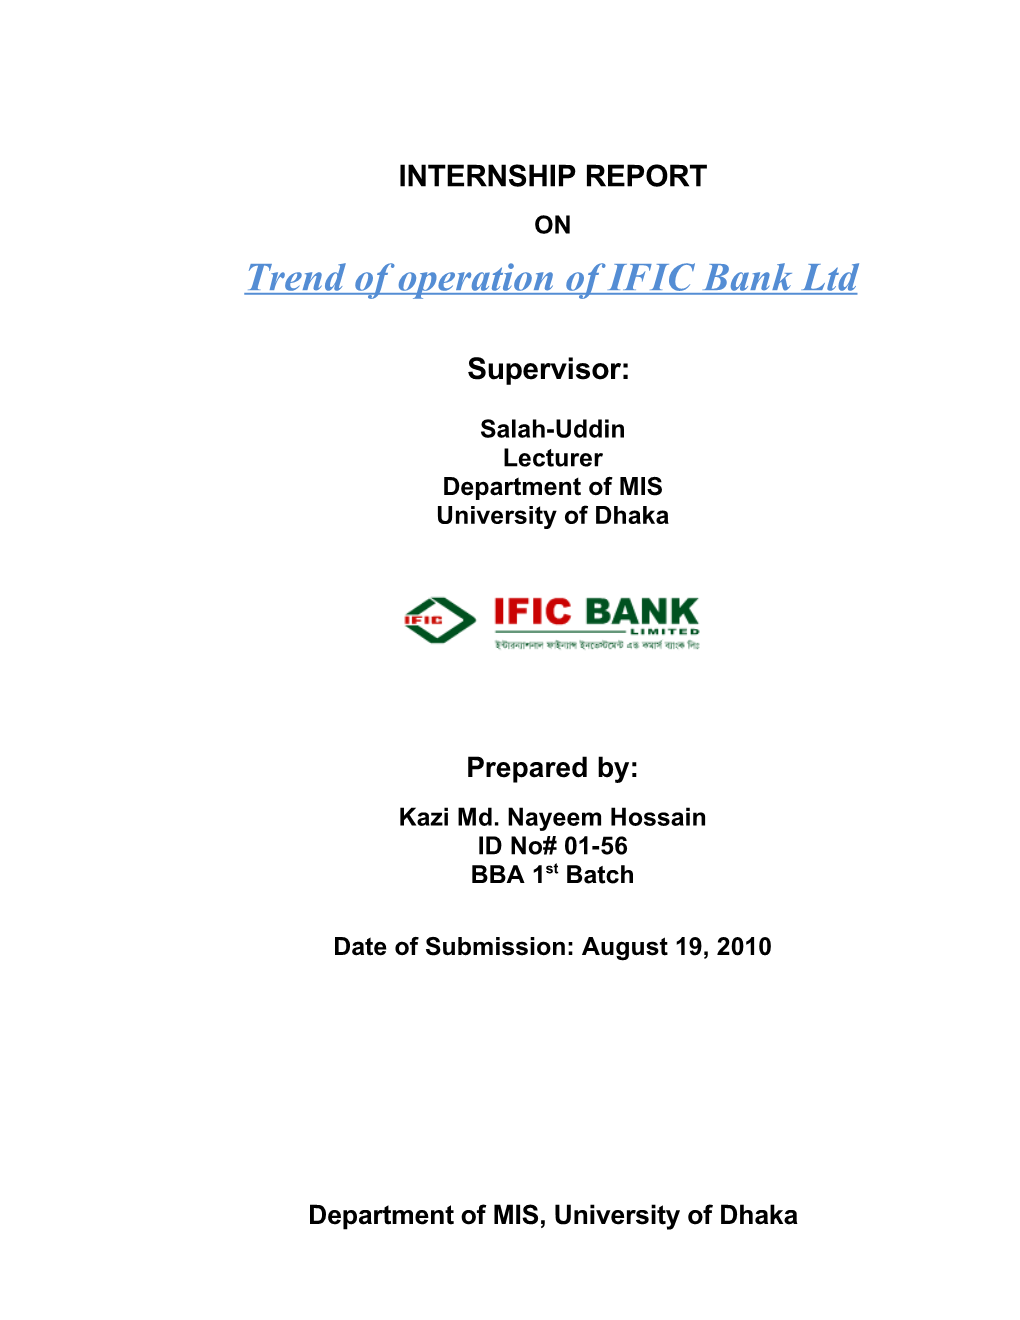 Trend of Operation of IFIC Bank Ltd